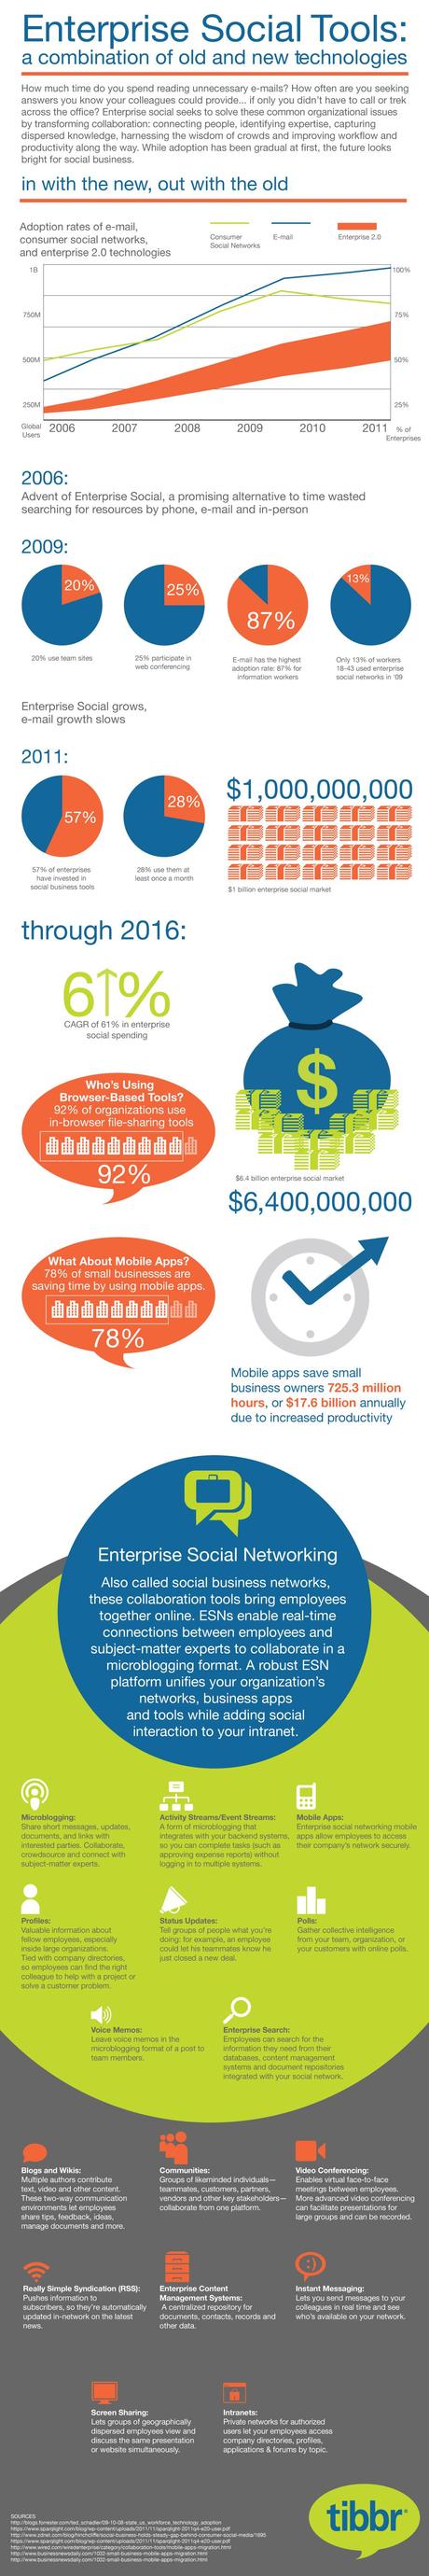 Infographic on Evolution of Enterprise Social Networking Tools